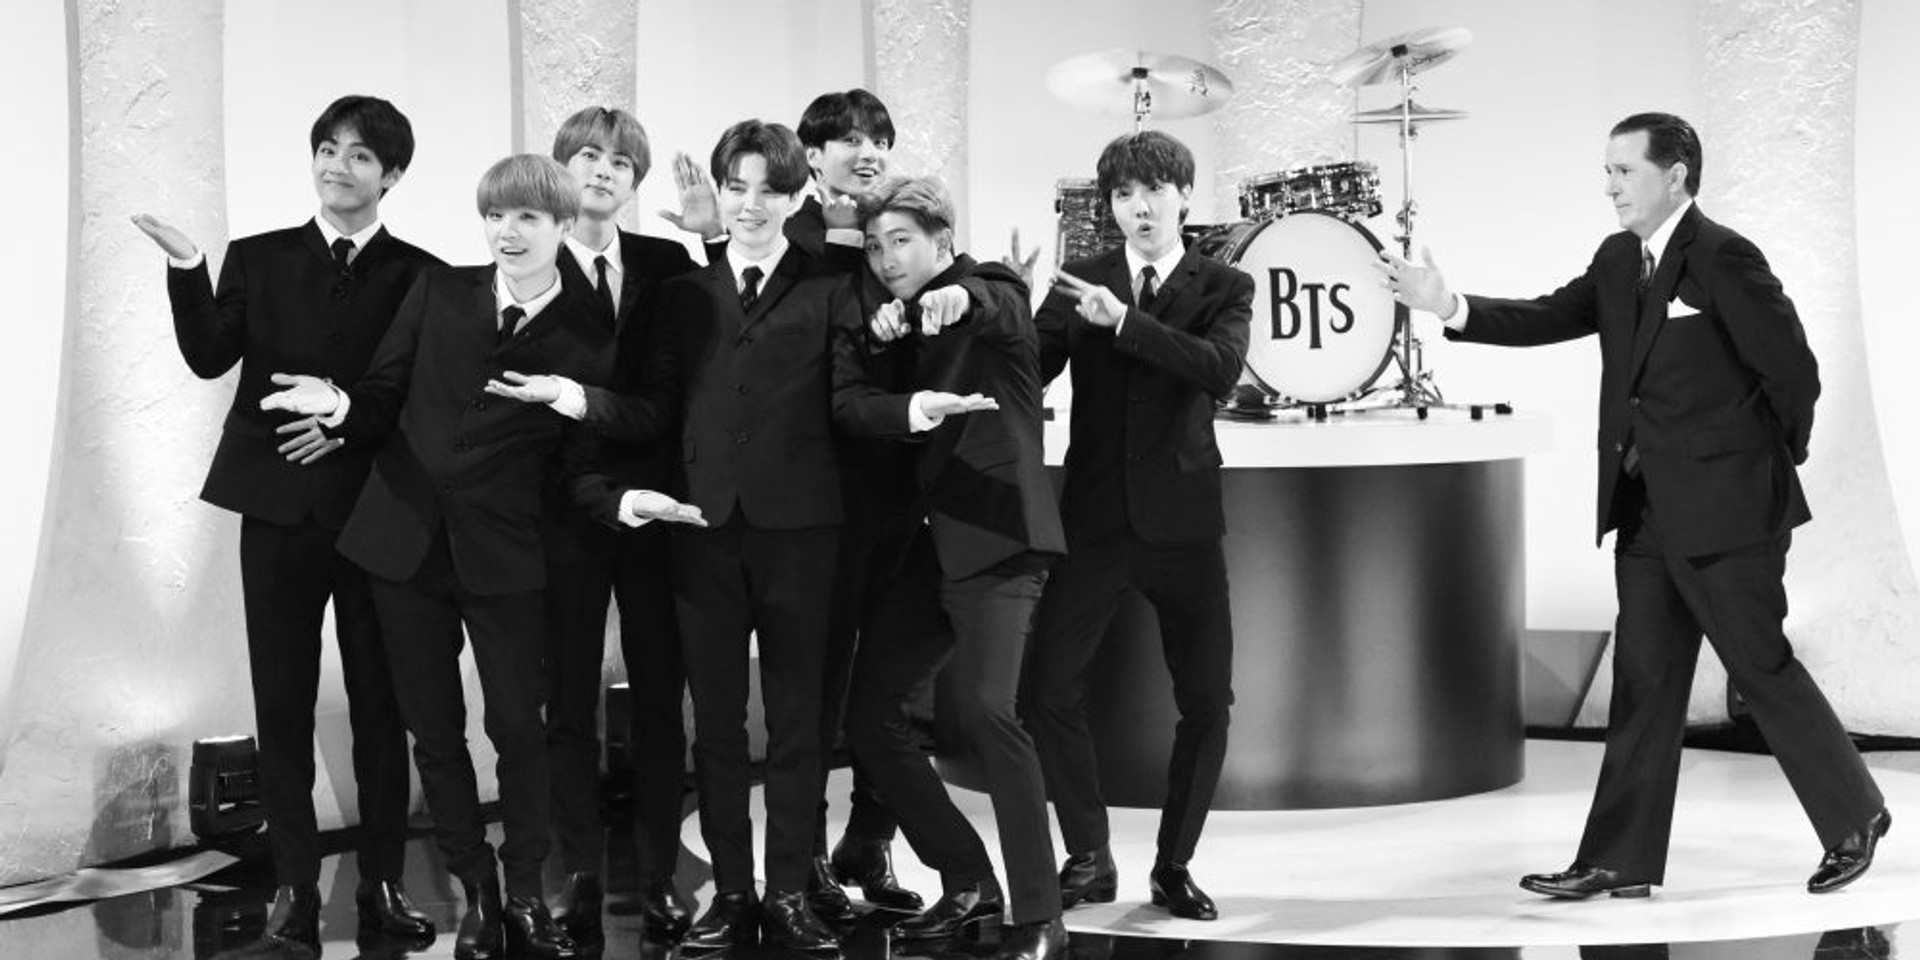 Twitter reacts to BTS' homage to The Beatles on the Late Show with Stephen Colbert